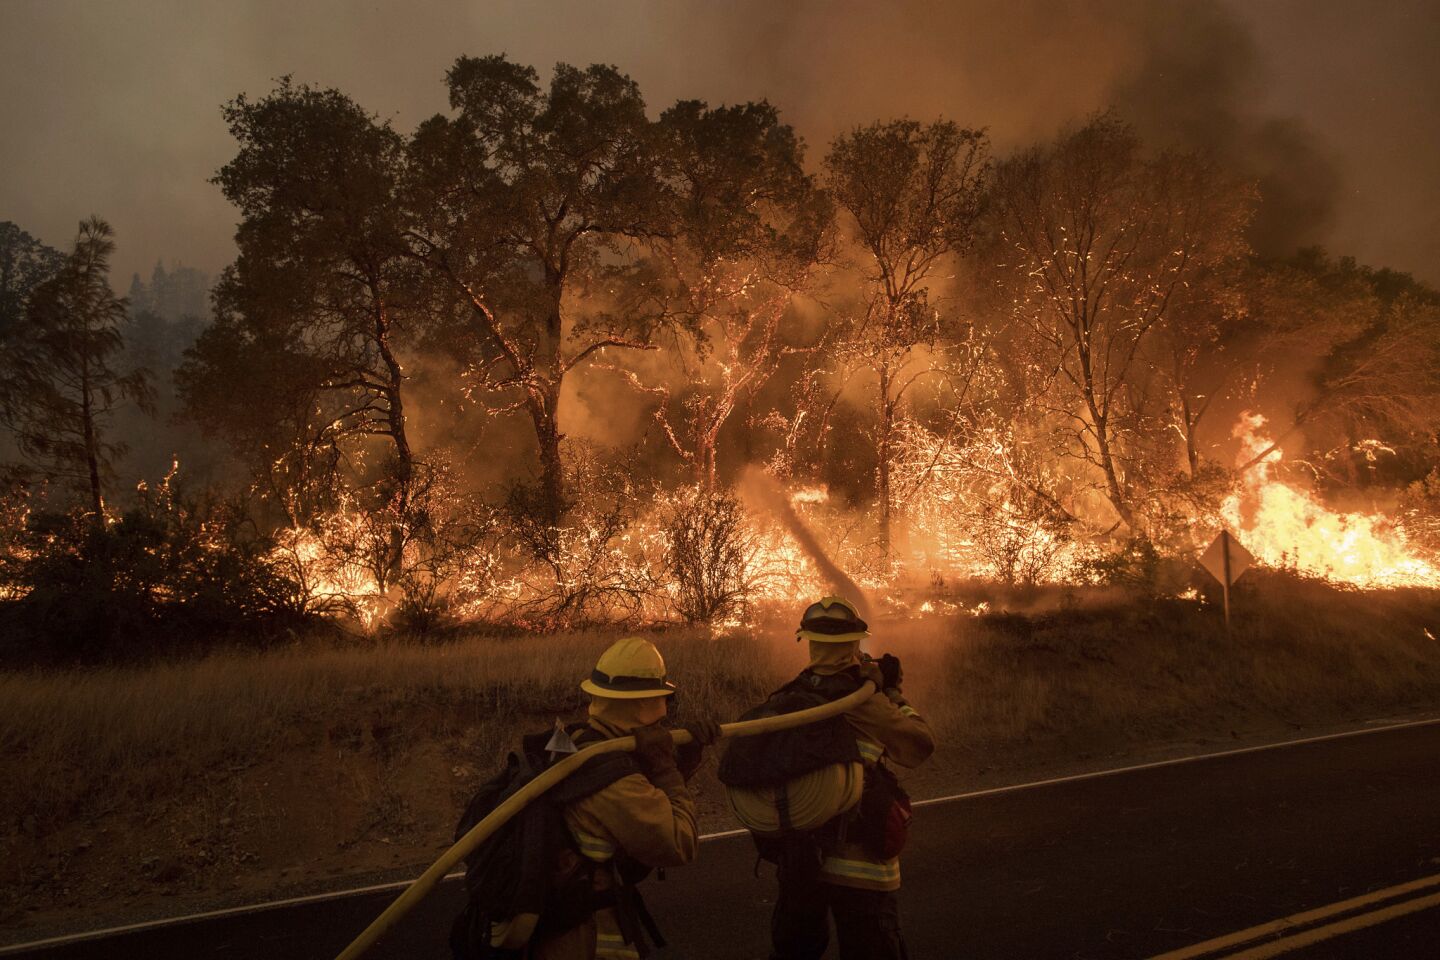 Firefighters battle a wildfire as it threatens to jump a road near Oroville. Evening winds drove the fire through several neighborhoods, leveling homes in its path.